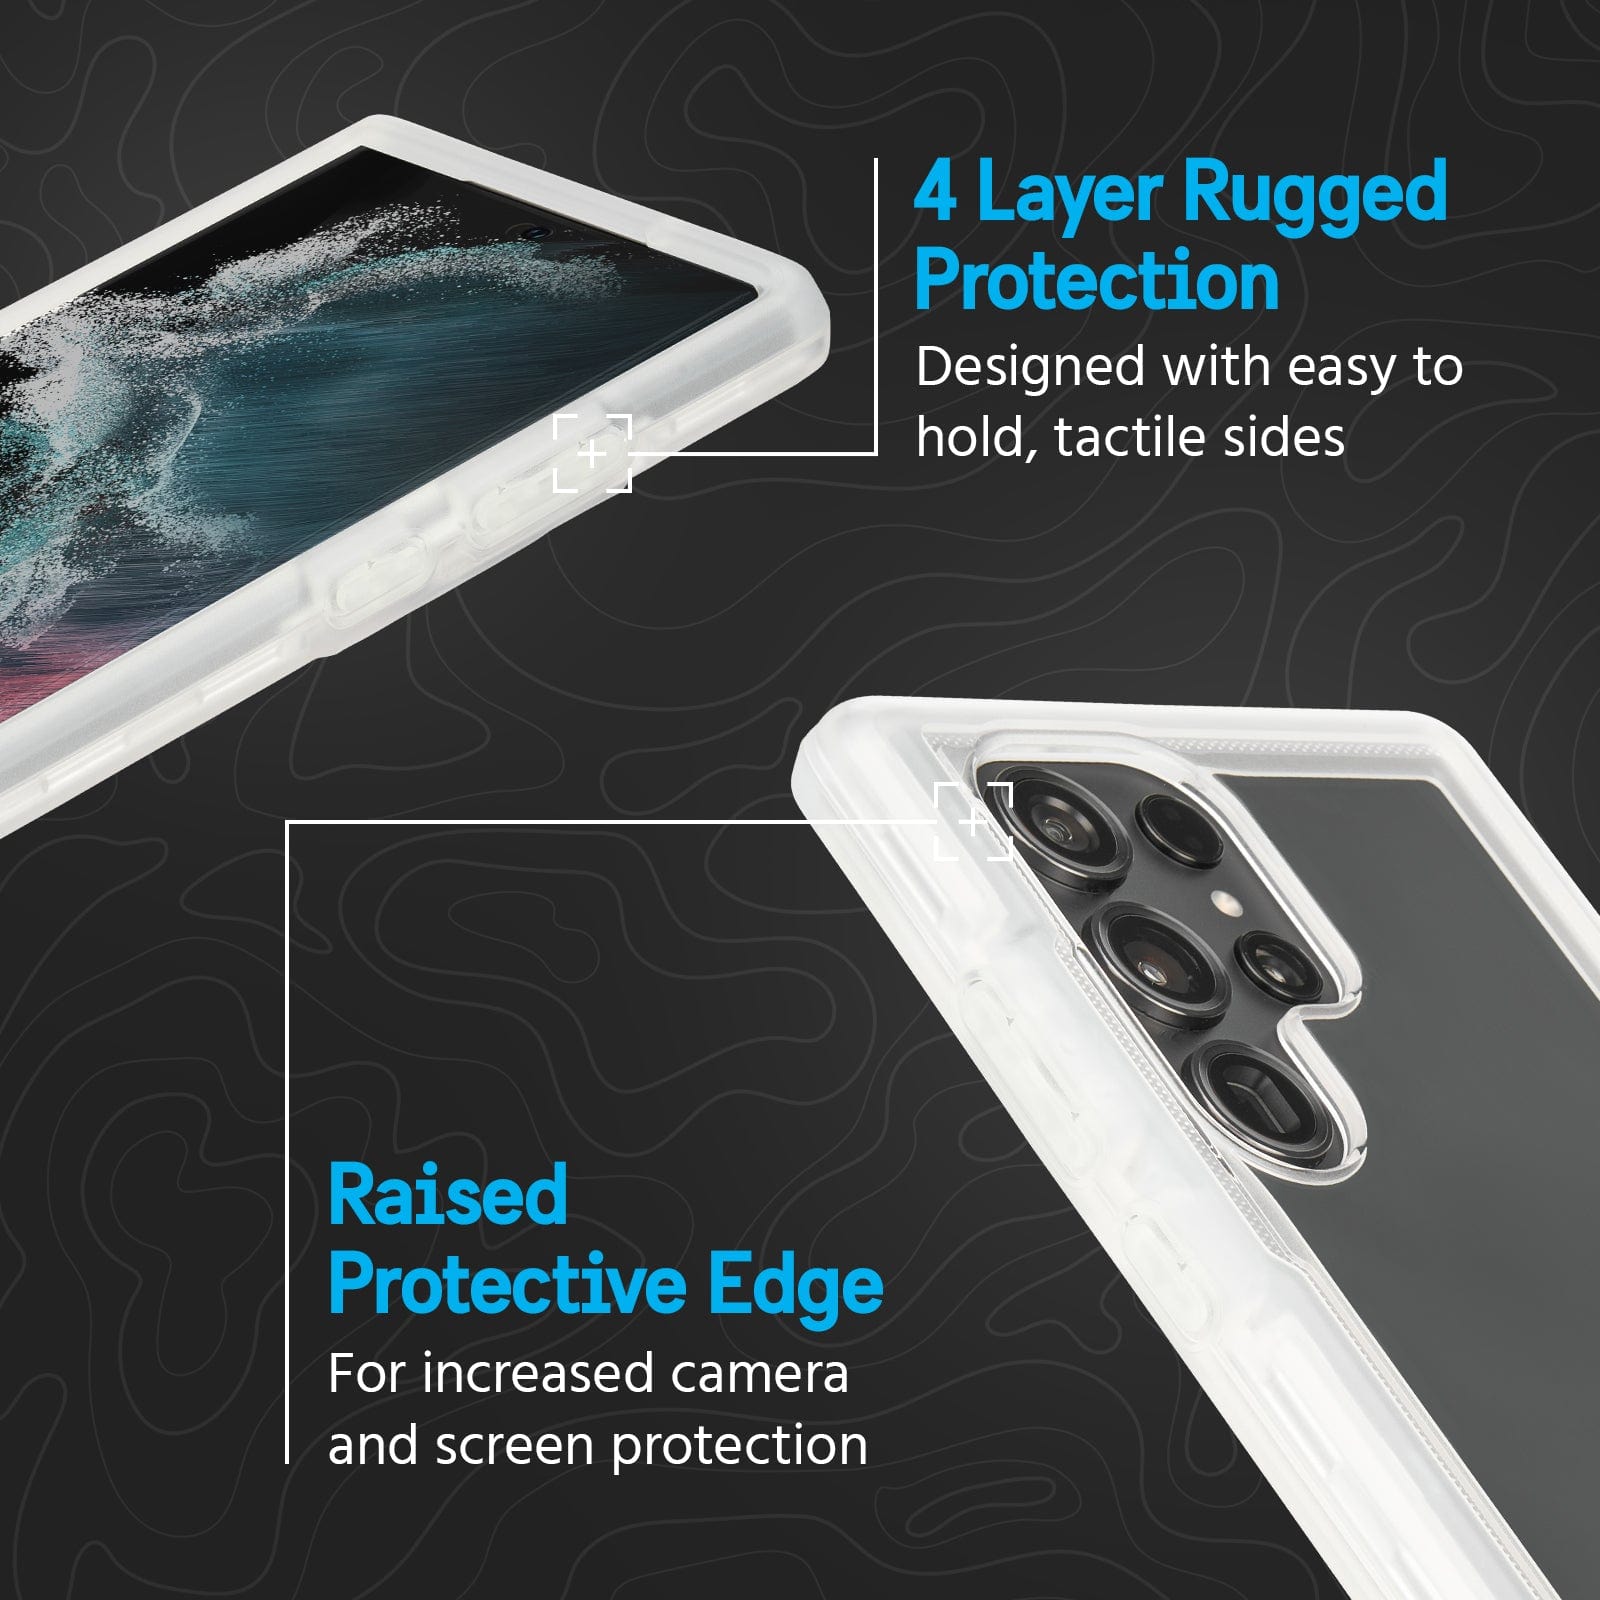 4  LAYER RUGGED PROTECTION. DESIGNED WITH EASY TO HOLD, TACTILE SIDES. RAISED PROTECTIVE EDGE FOR INCREASED CAMERA AND SCREEN PROTECTION. 